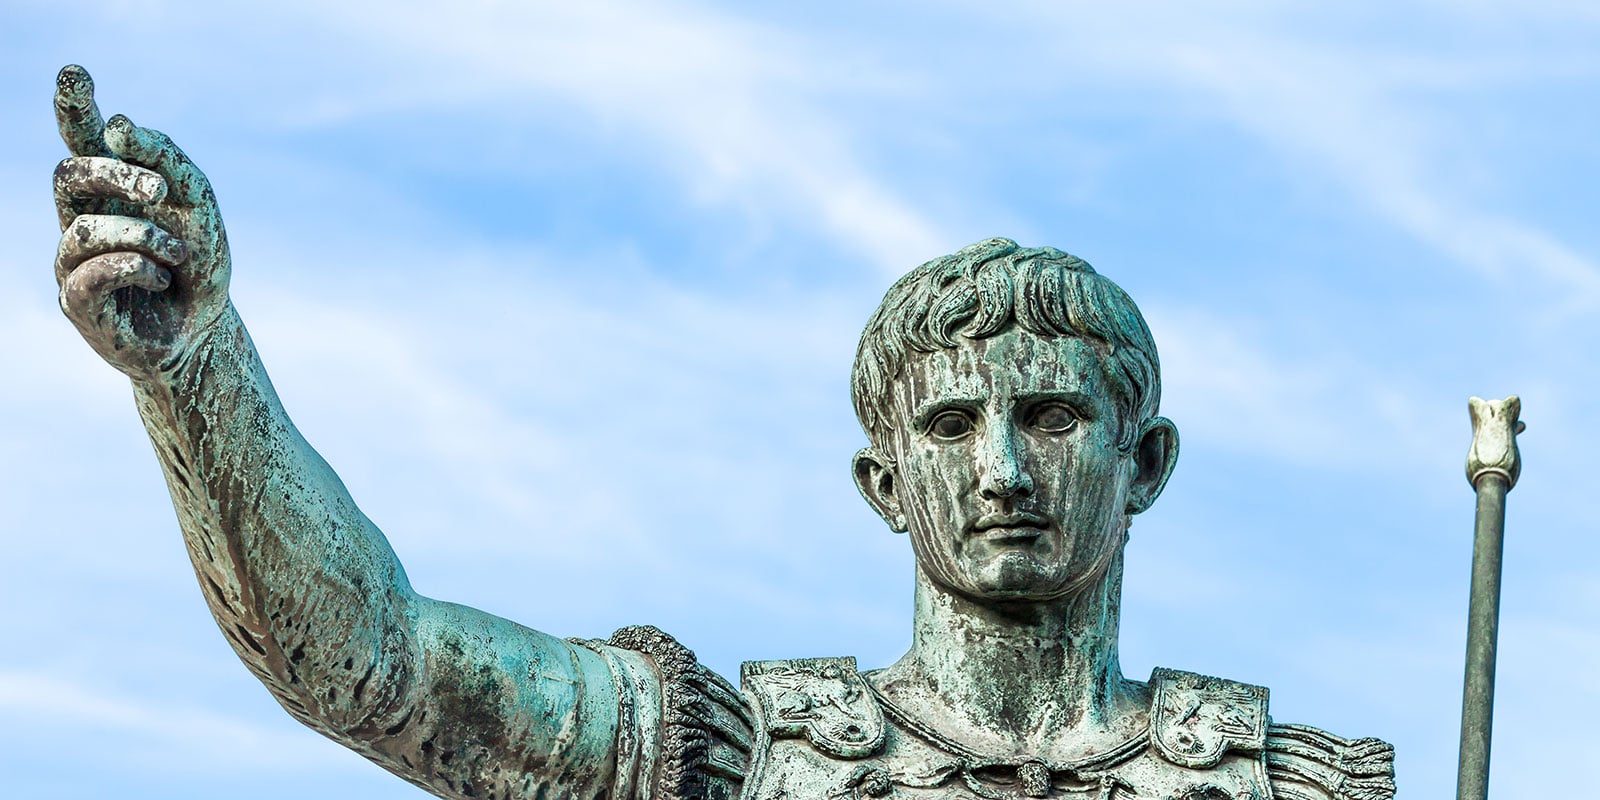 Augustus Caeser statue outside the Forum in Rome, Italy (ShopArtGallerycom/Dreamstime)